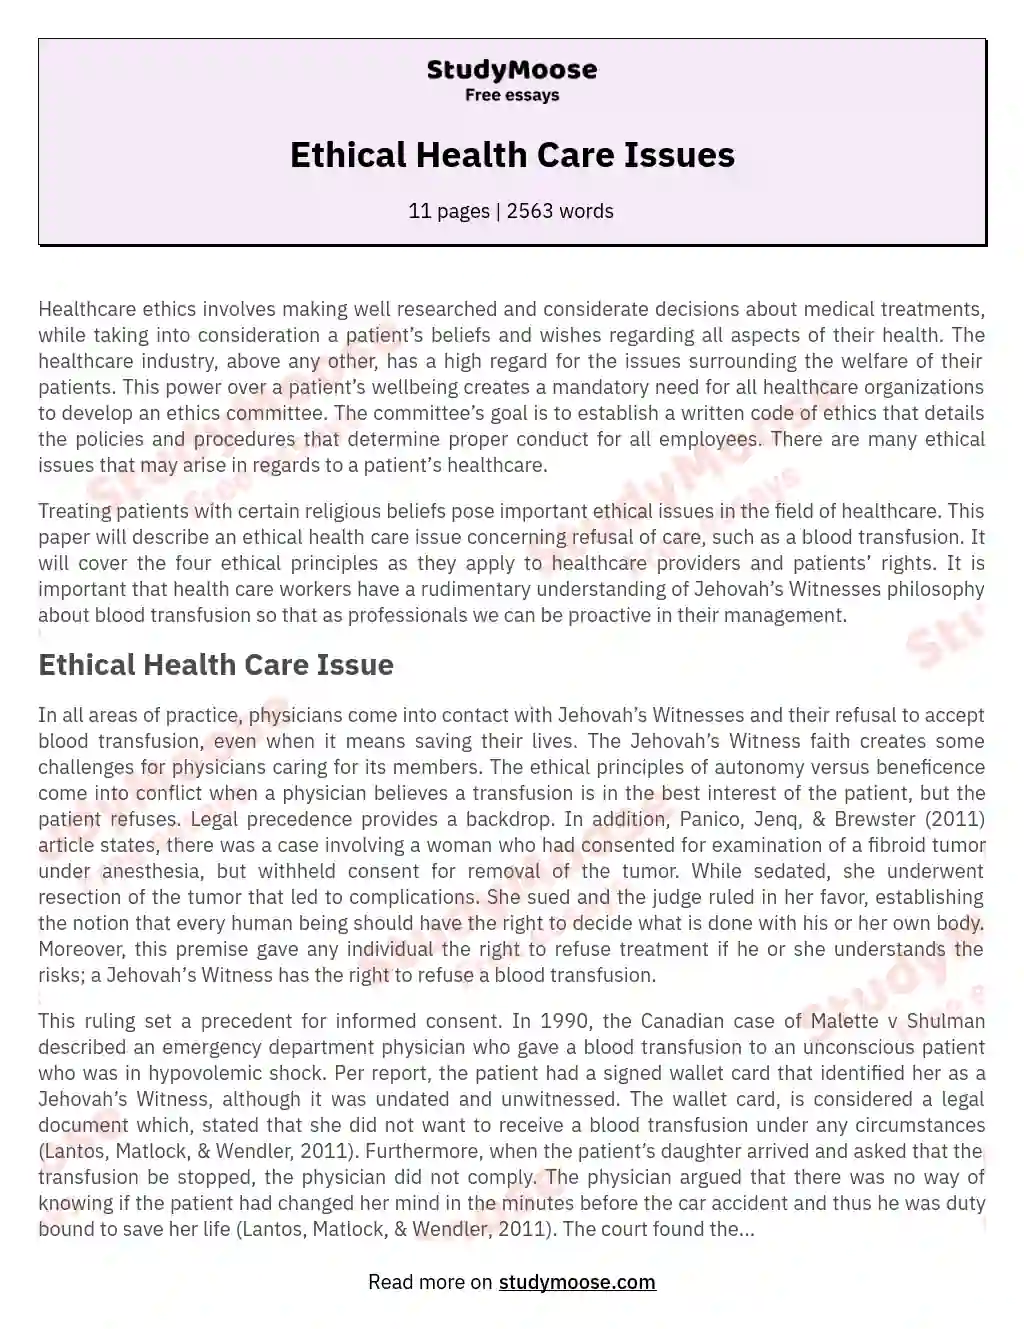 Ethical Health Care Issues essay